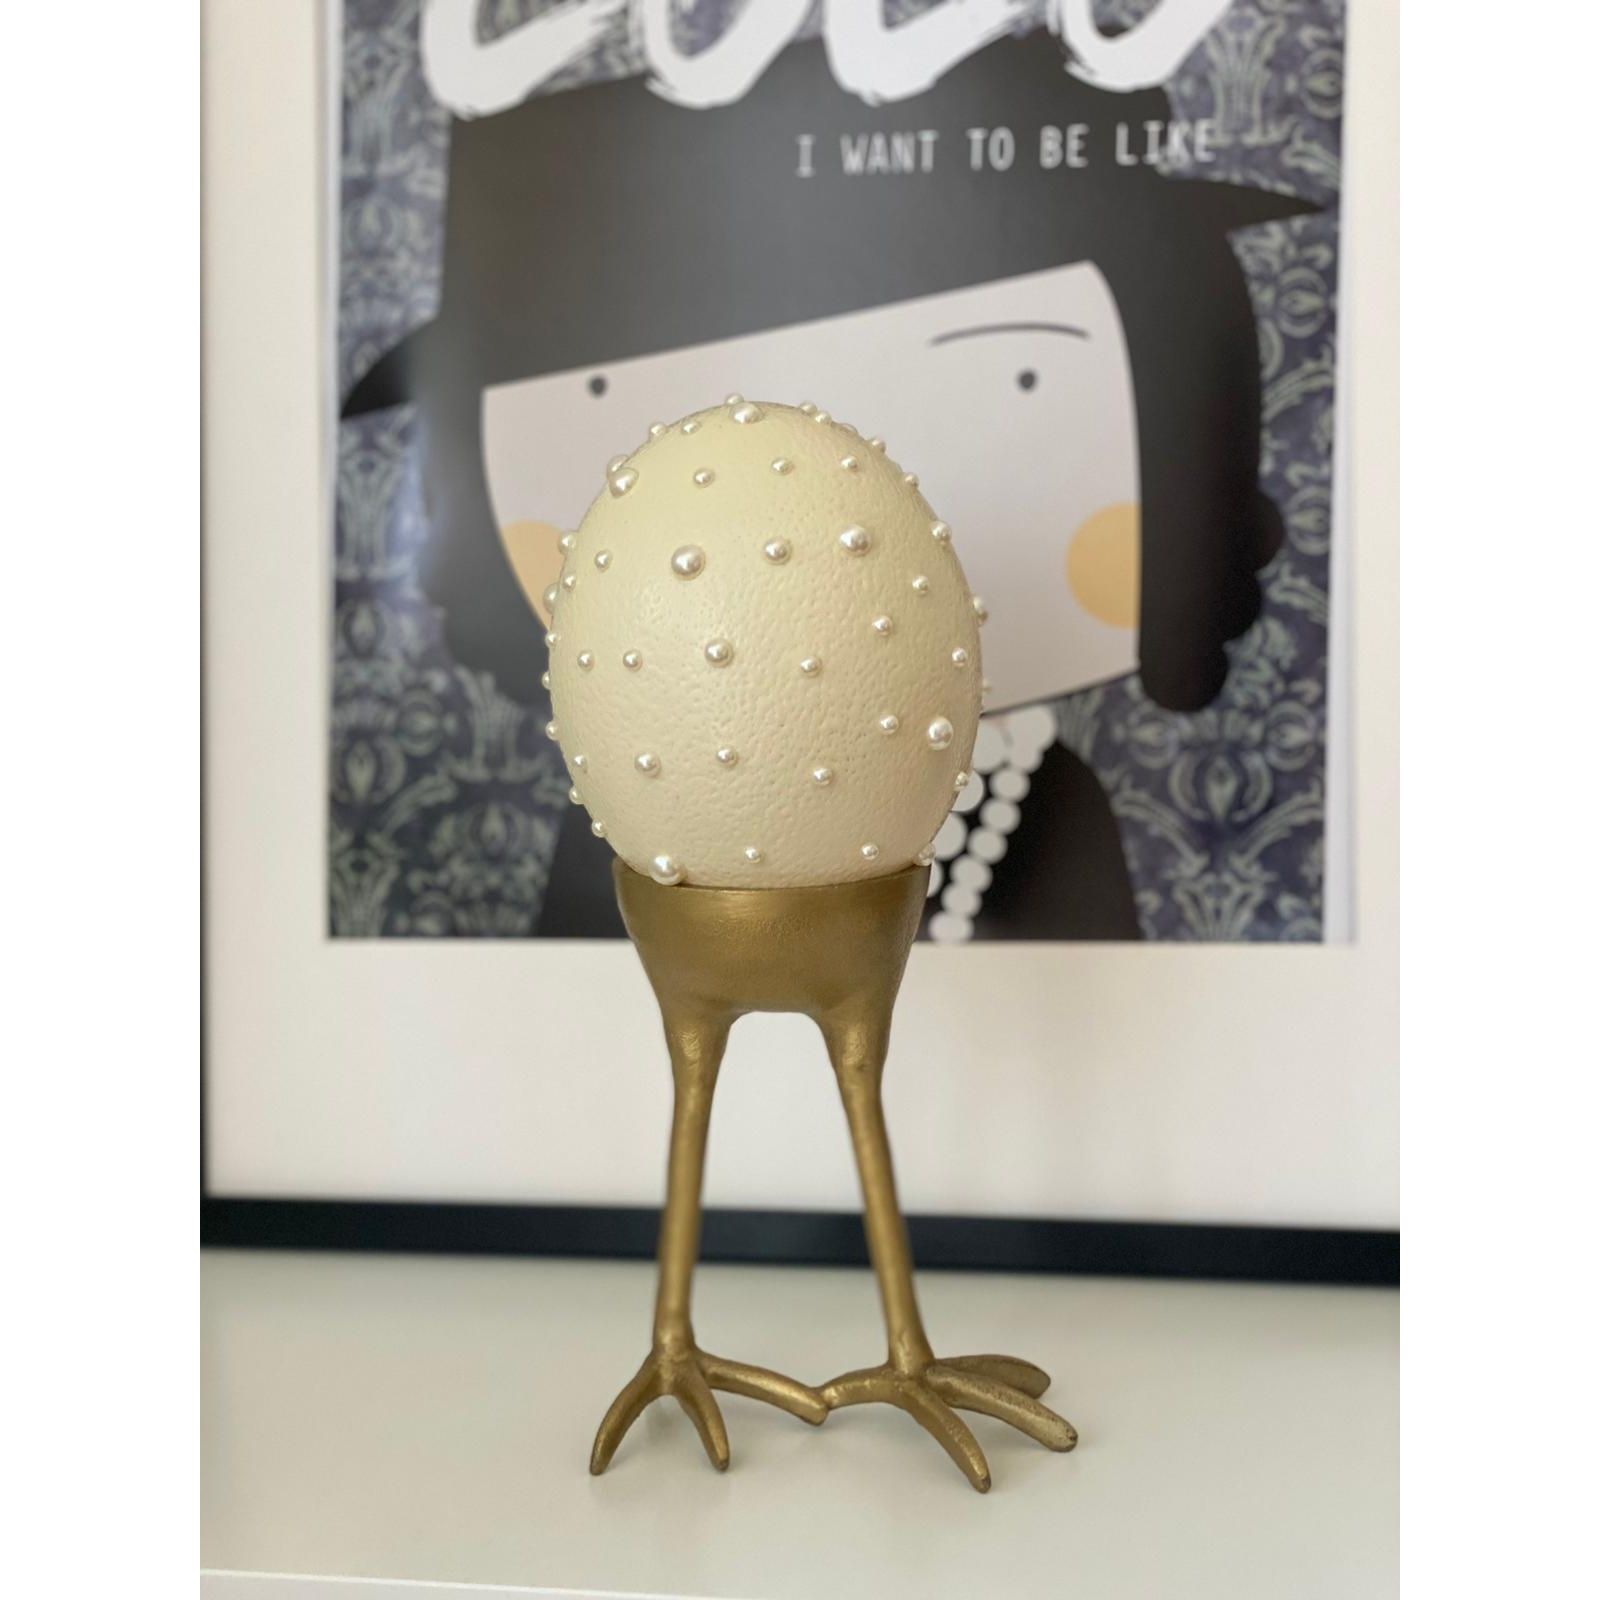 Ostrich egg "Beads thrown on eggs" including bird foot stand